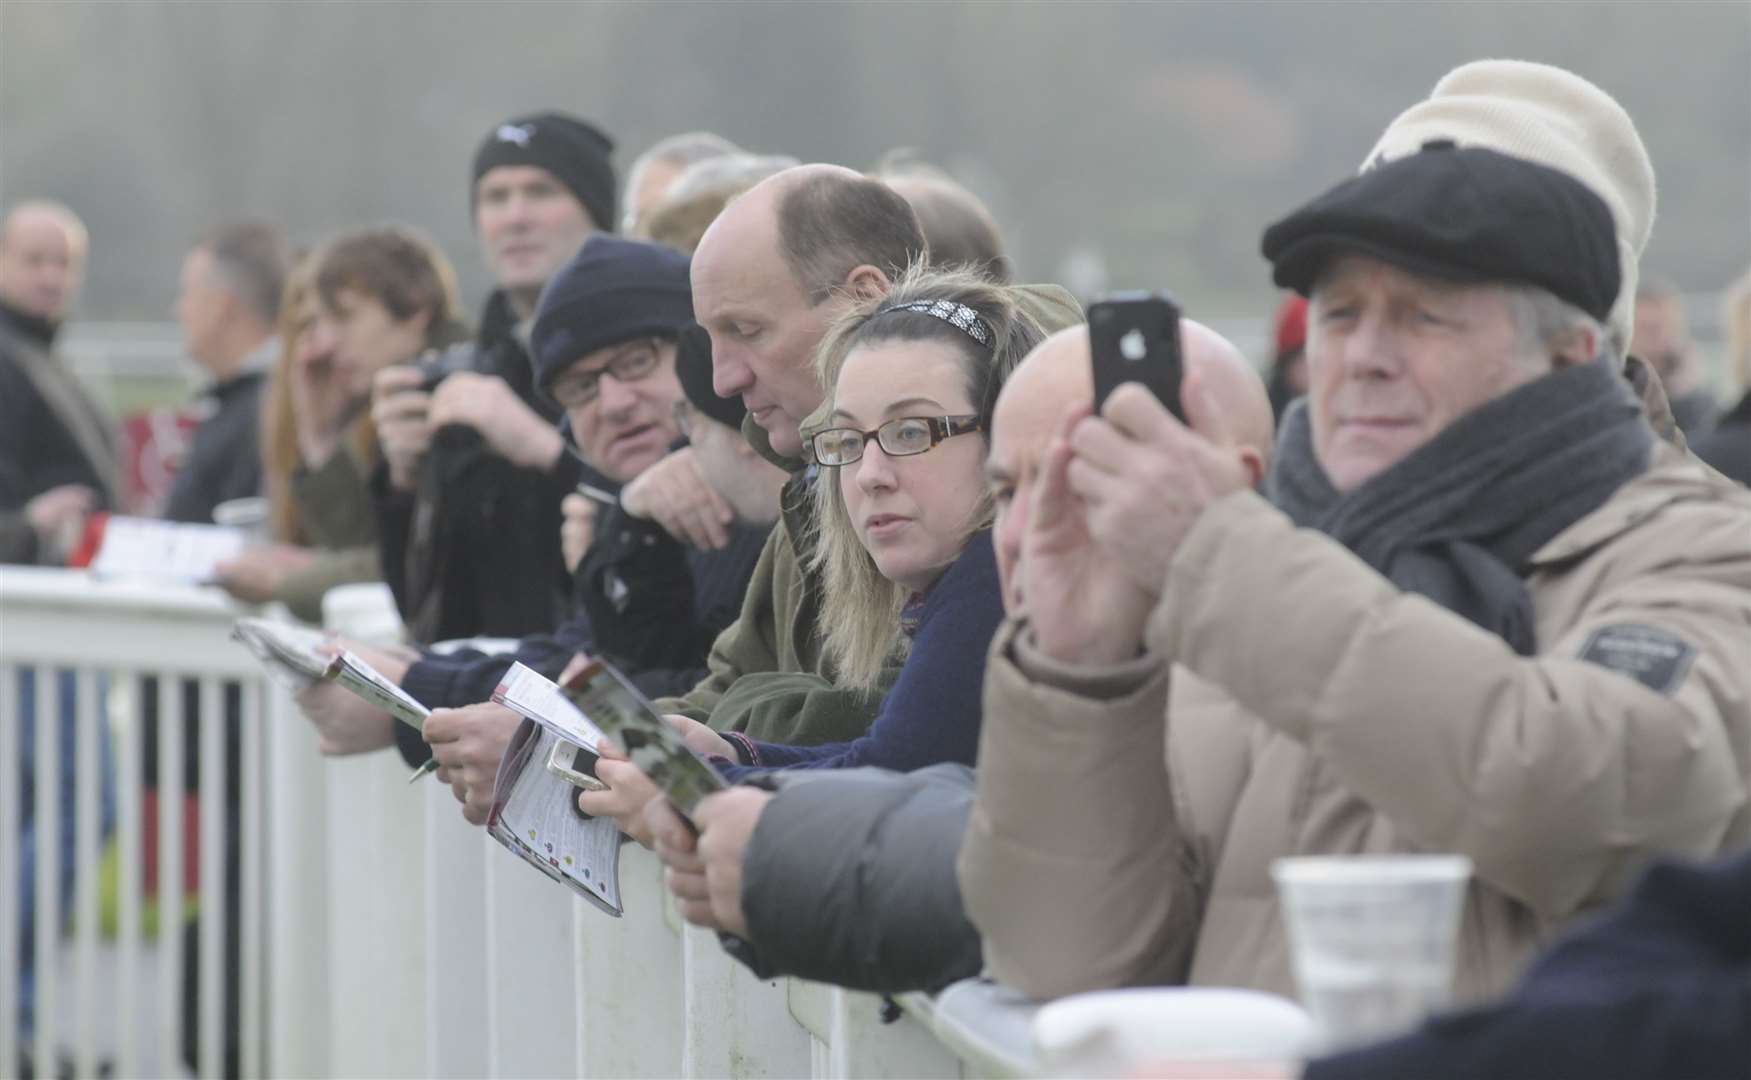 Spectators at the final event in December 2012